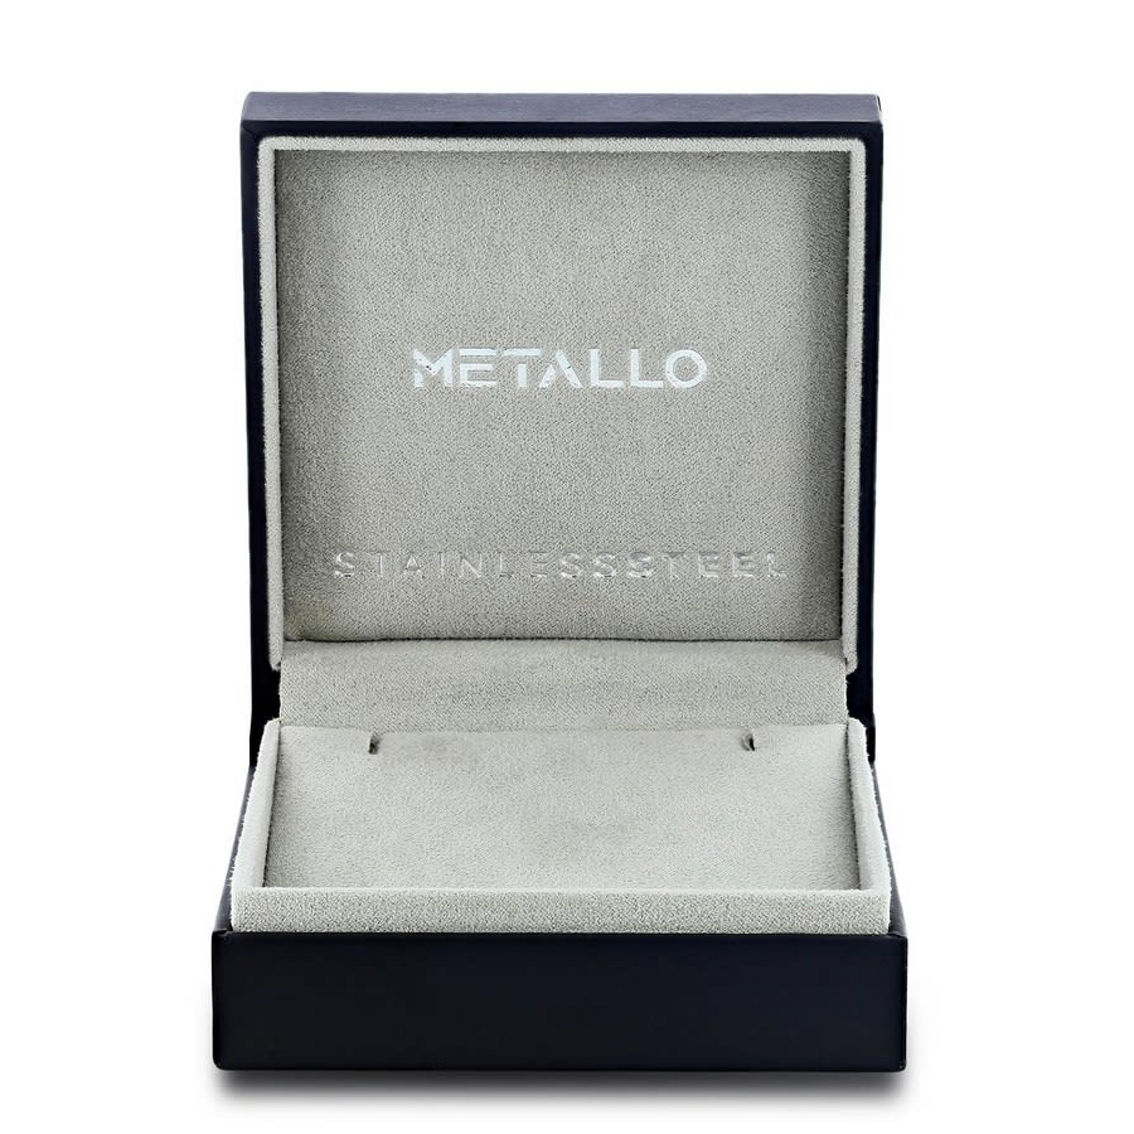 Metallo Stainless Steel CZ Square Link Bracelet - Gold Plated - Image 3 of 3